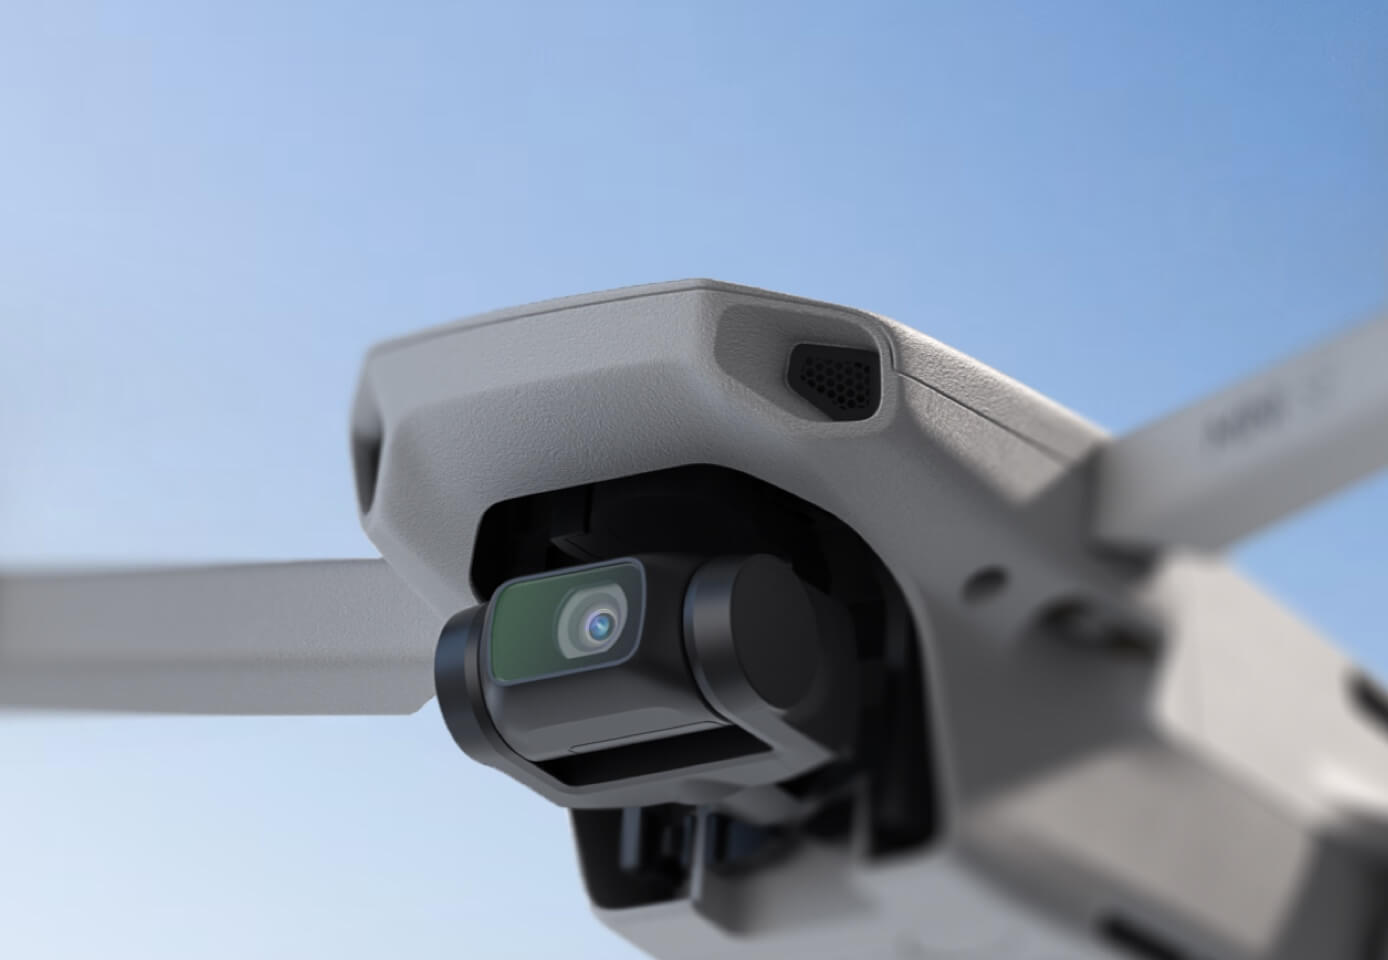 DJI Mini SE - Camera, DJI Mini SE, the DJI Fly app offers a variety of Creator Templates that generate awesome videos with just